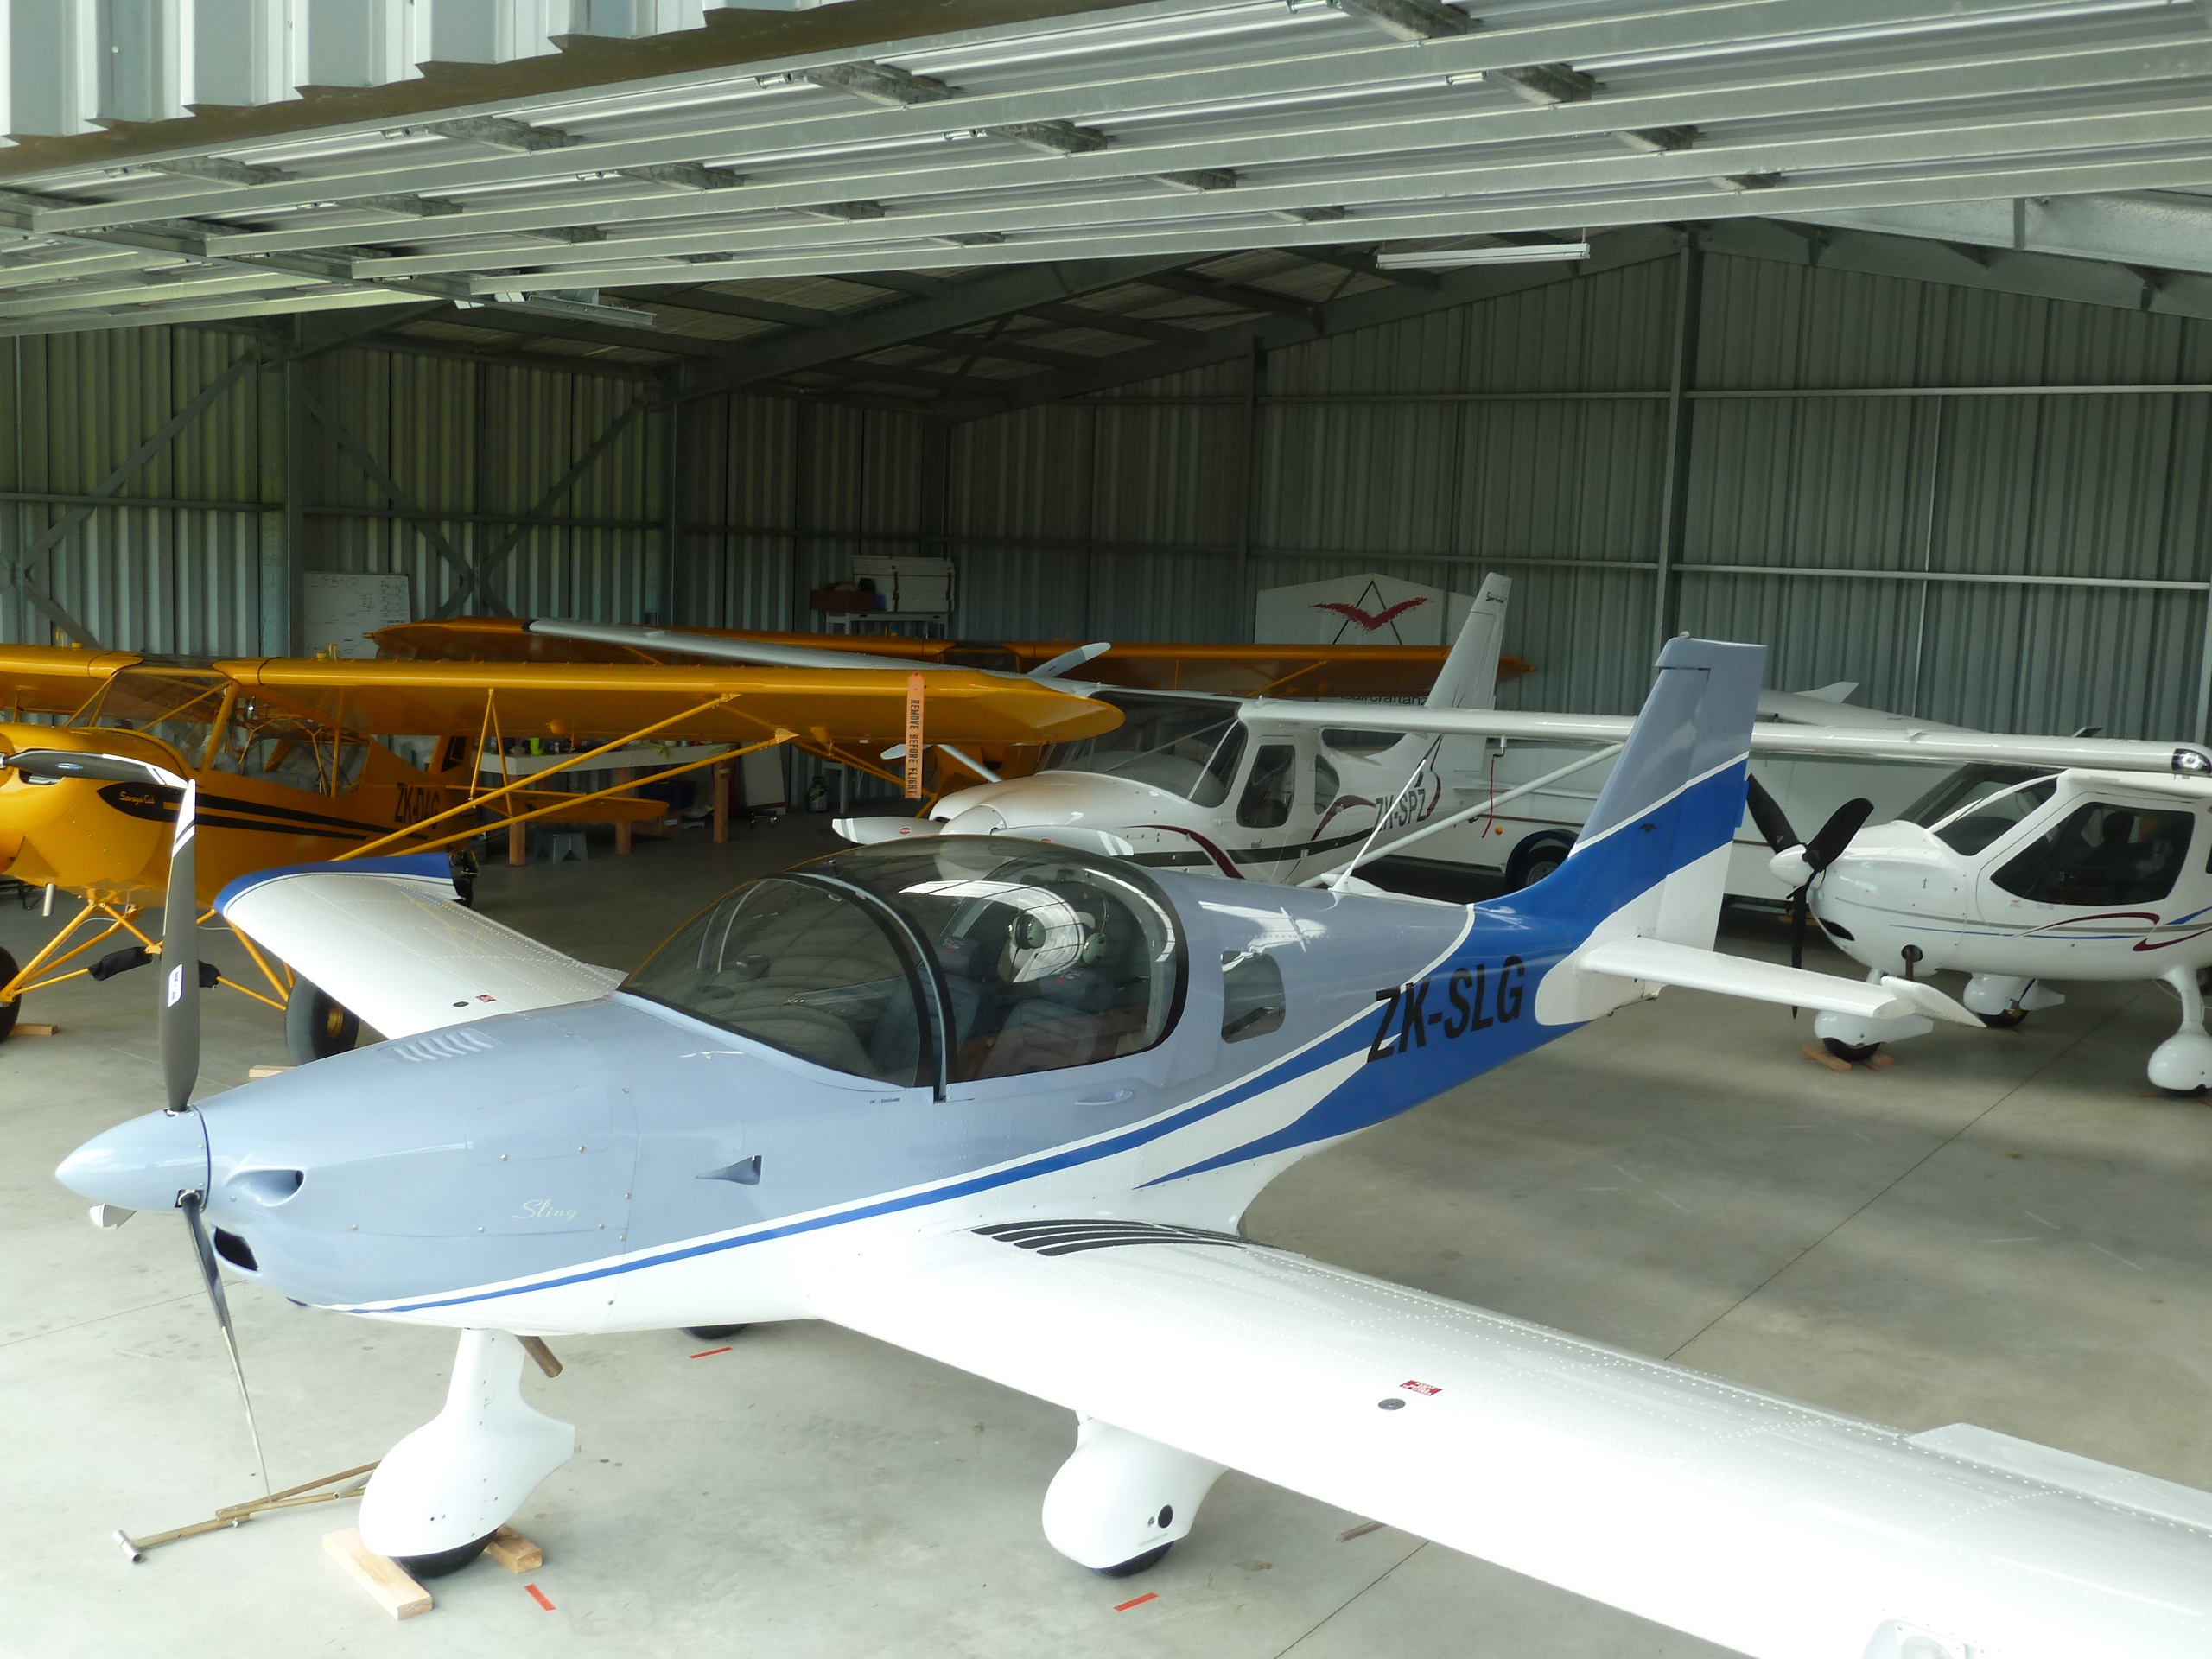 We have a couple of Savage Cub’s, Glasair Sportsman, TAF Sling and a Flight Design CTLS now in the hangar. Started the conversion training on Savage Cub ZK-DAG this week […]